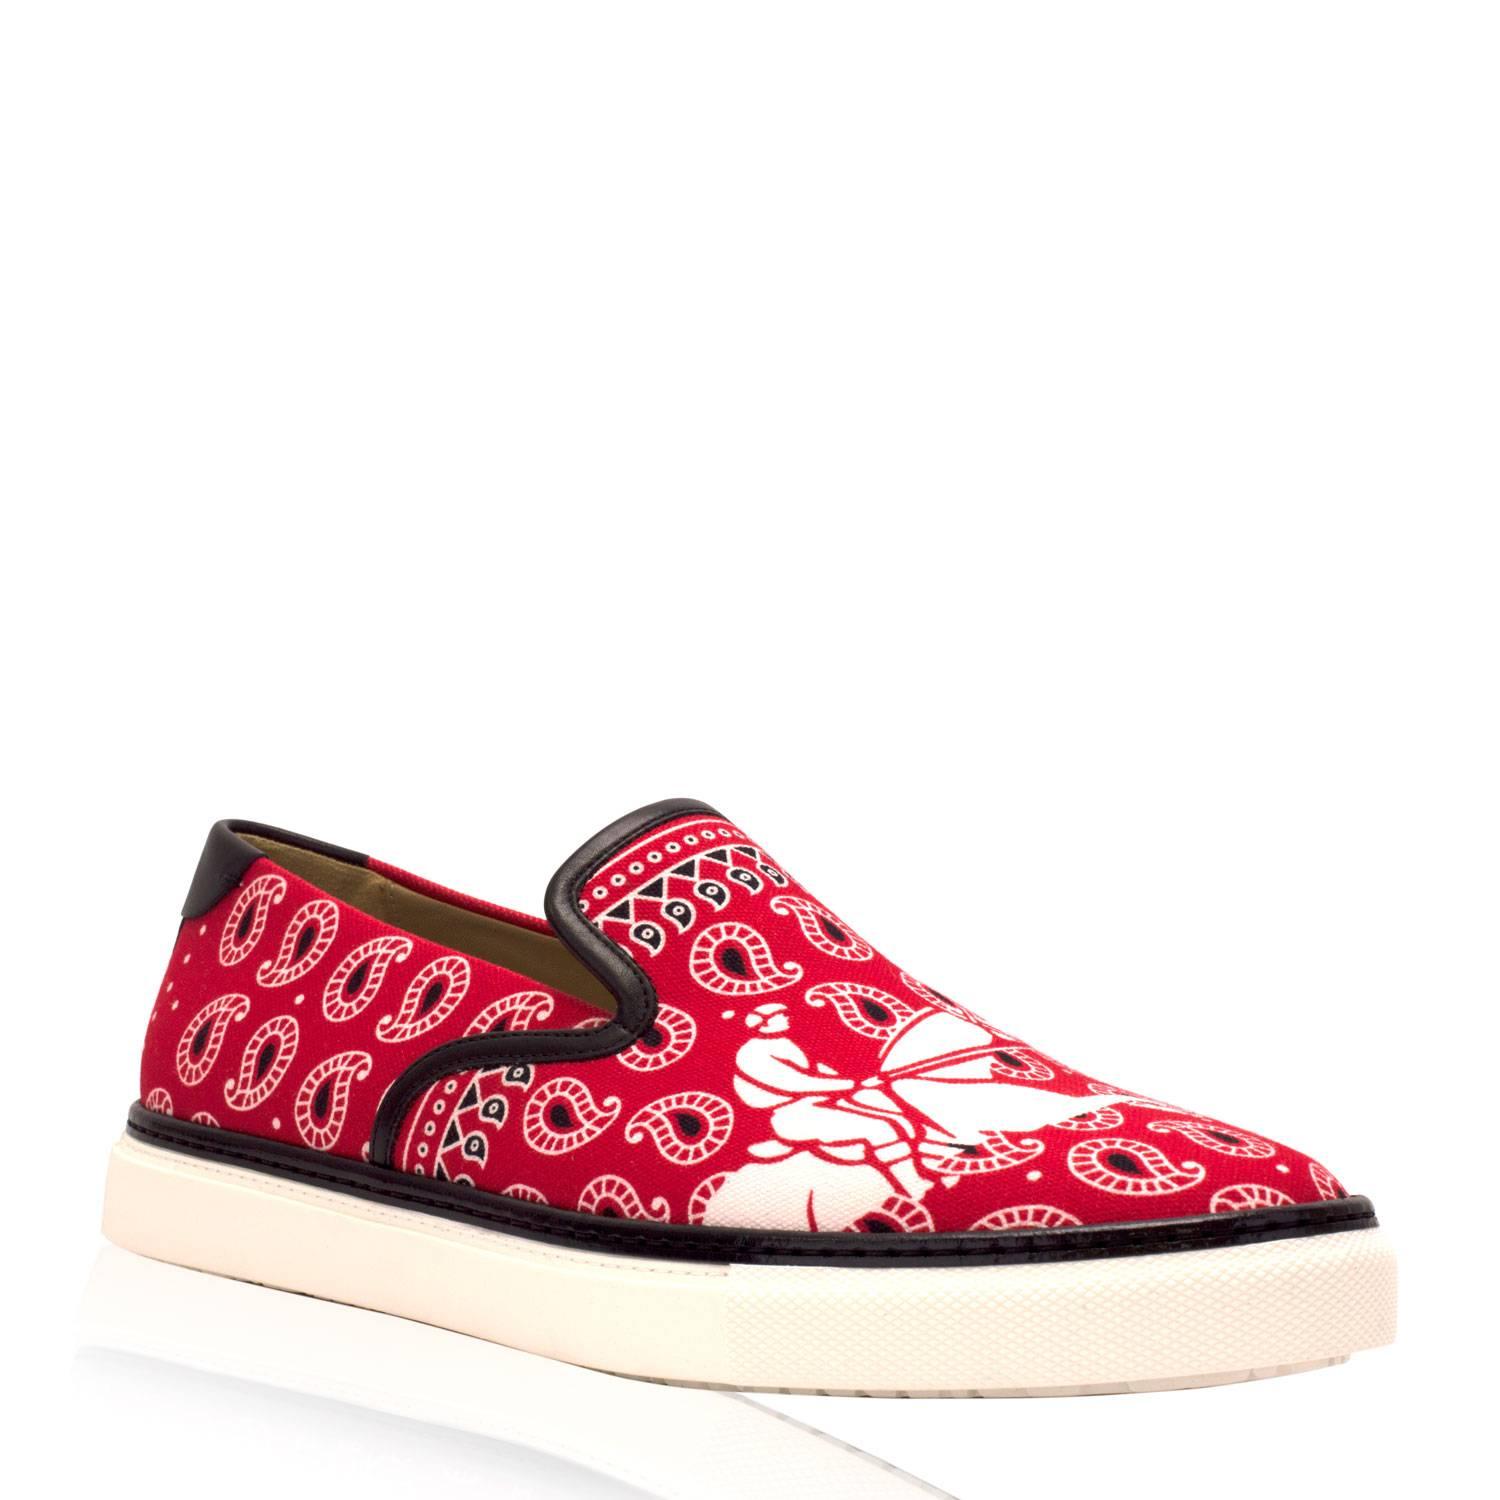 Hermes Men sneakers "kick" Toile de Coton Imprimee "Ecurie Parisienne" Veau Leather Rouge / Noir Color 41,5 Size 2016

Pristine condition. Pre-owned and never used.

This item has a price on boutique hermes $ 710.00.

Bought it